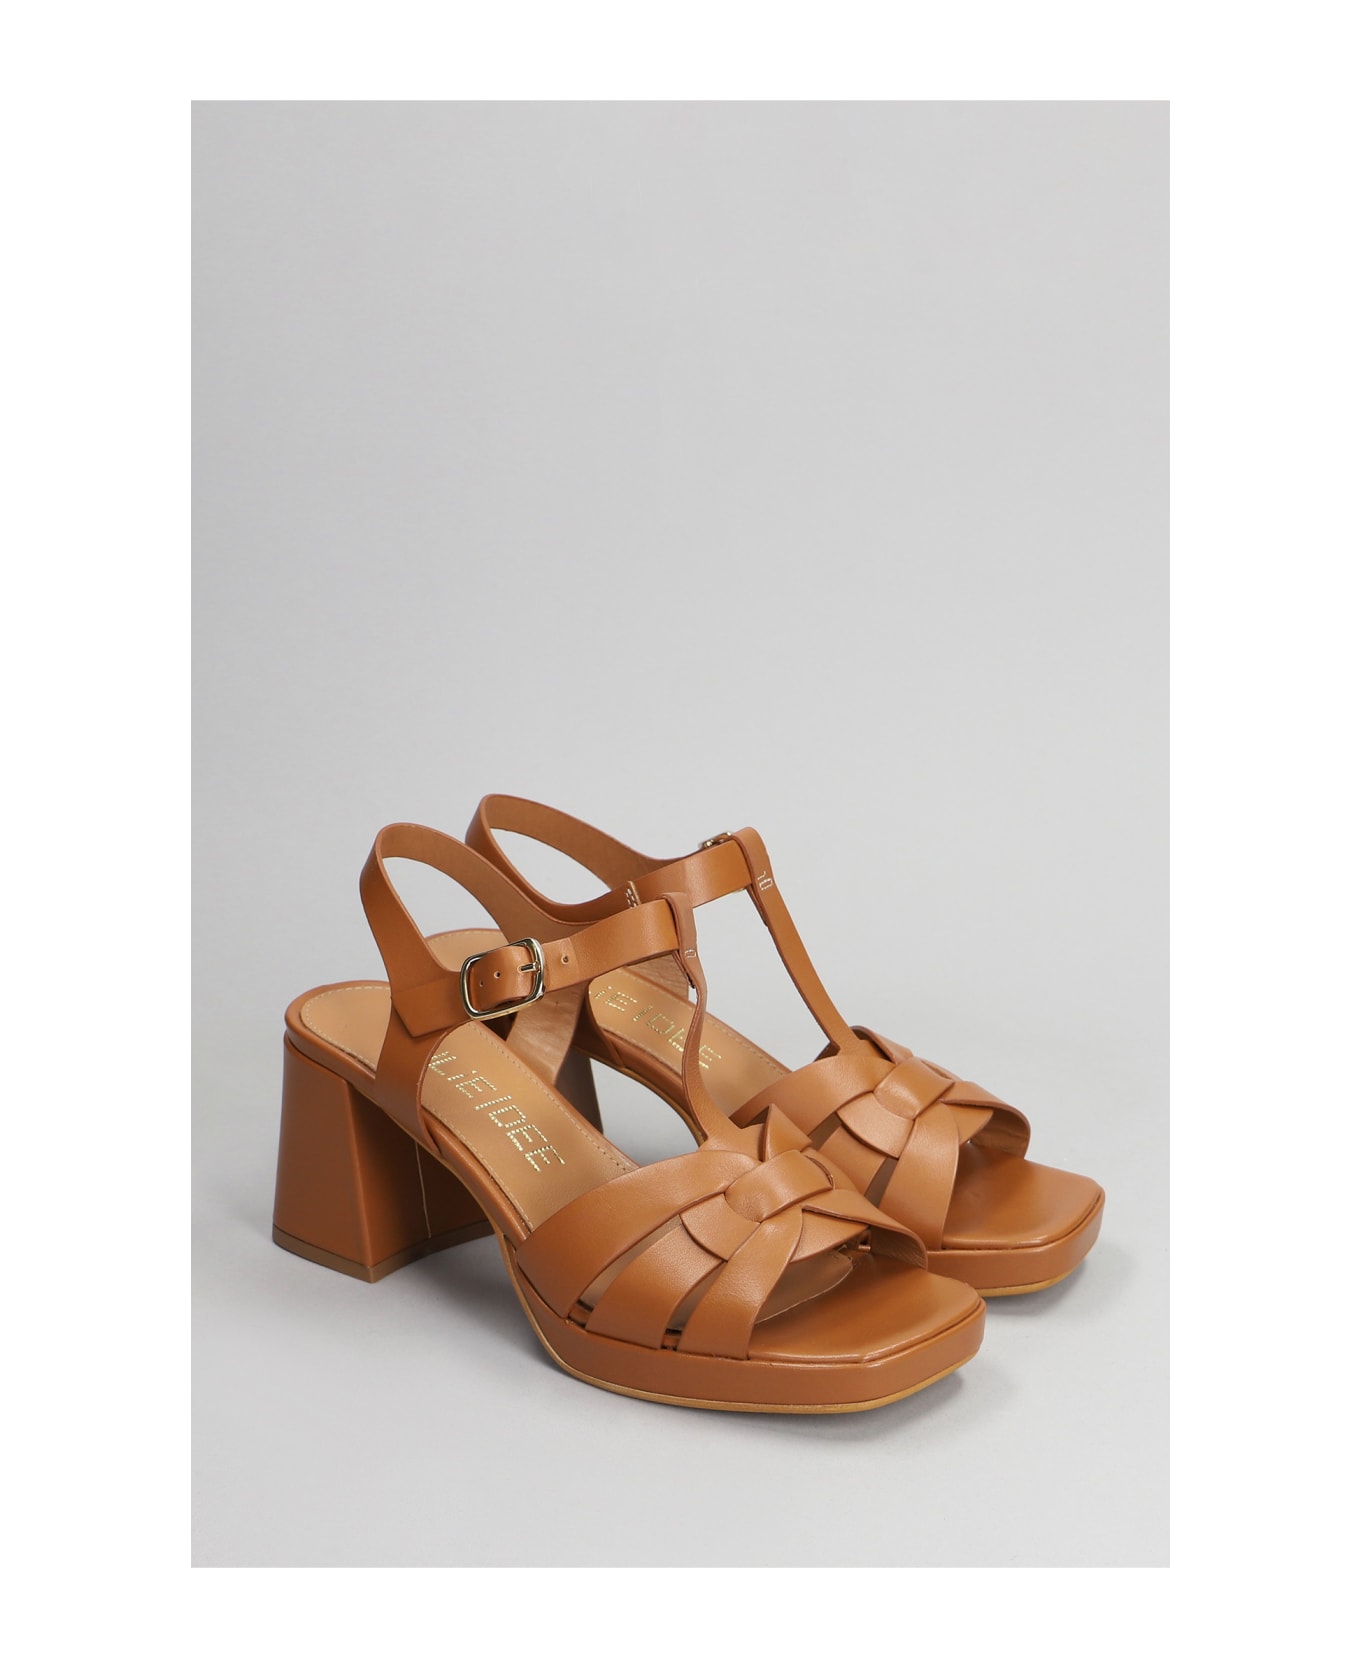 Julie Dee Sandals In Leather Color Leather - leather color